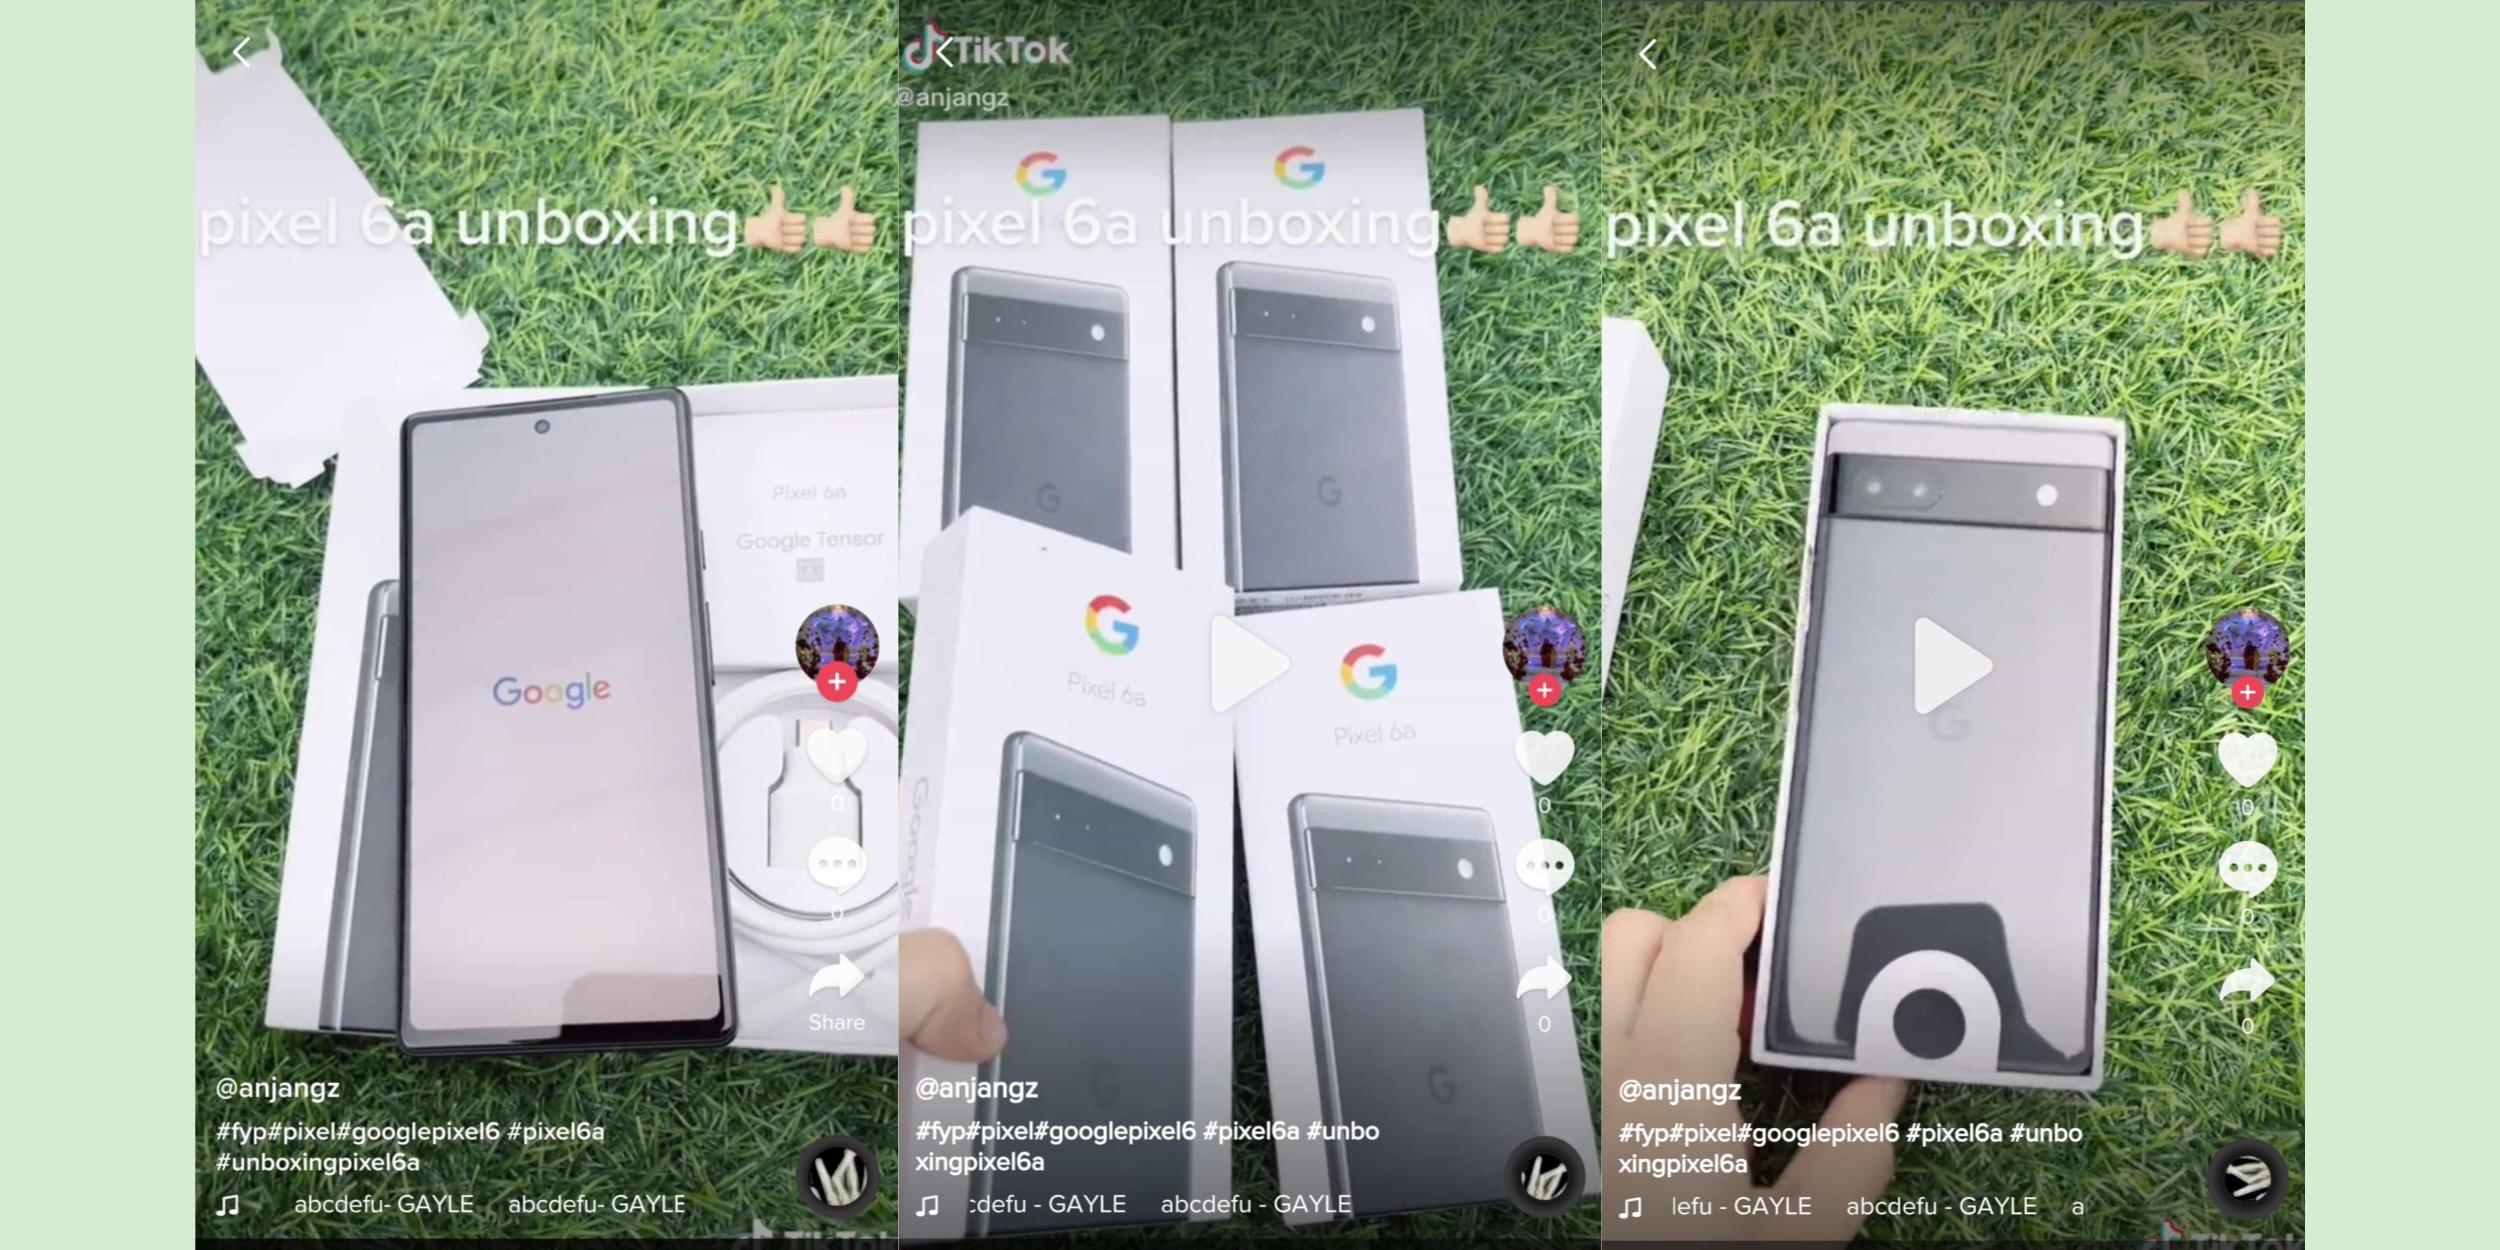 Google Pixel 6a gets new unboxing, launch weeks away - 9to5Google